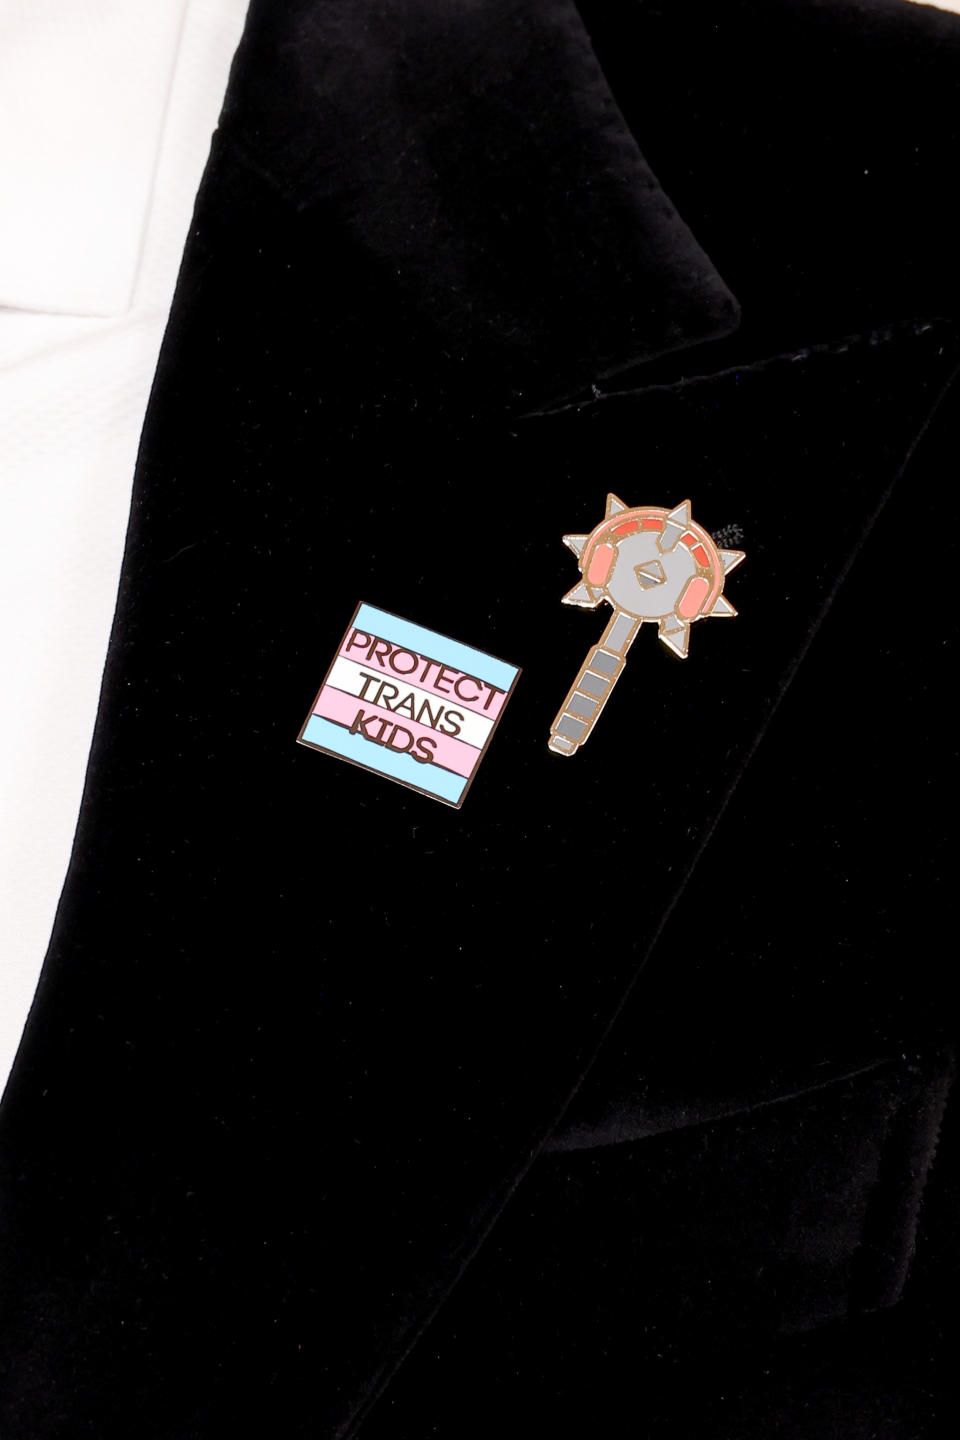 Two lapel pins on a jacket, one with text "PROTECT TRANS KIDS," and the other shaped like a key